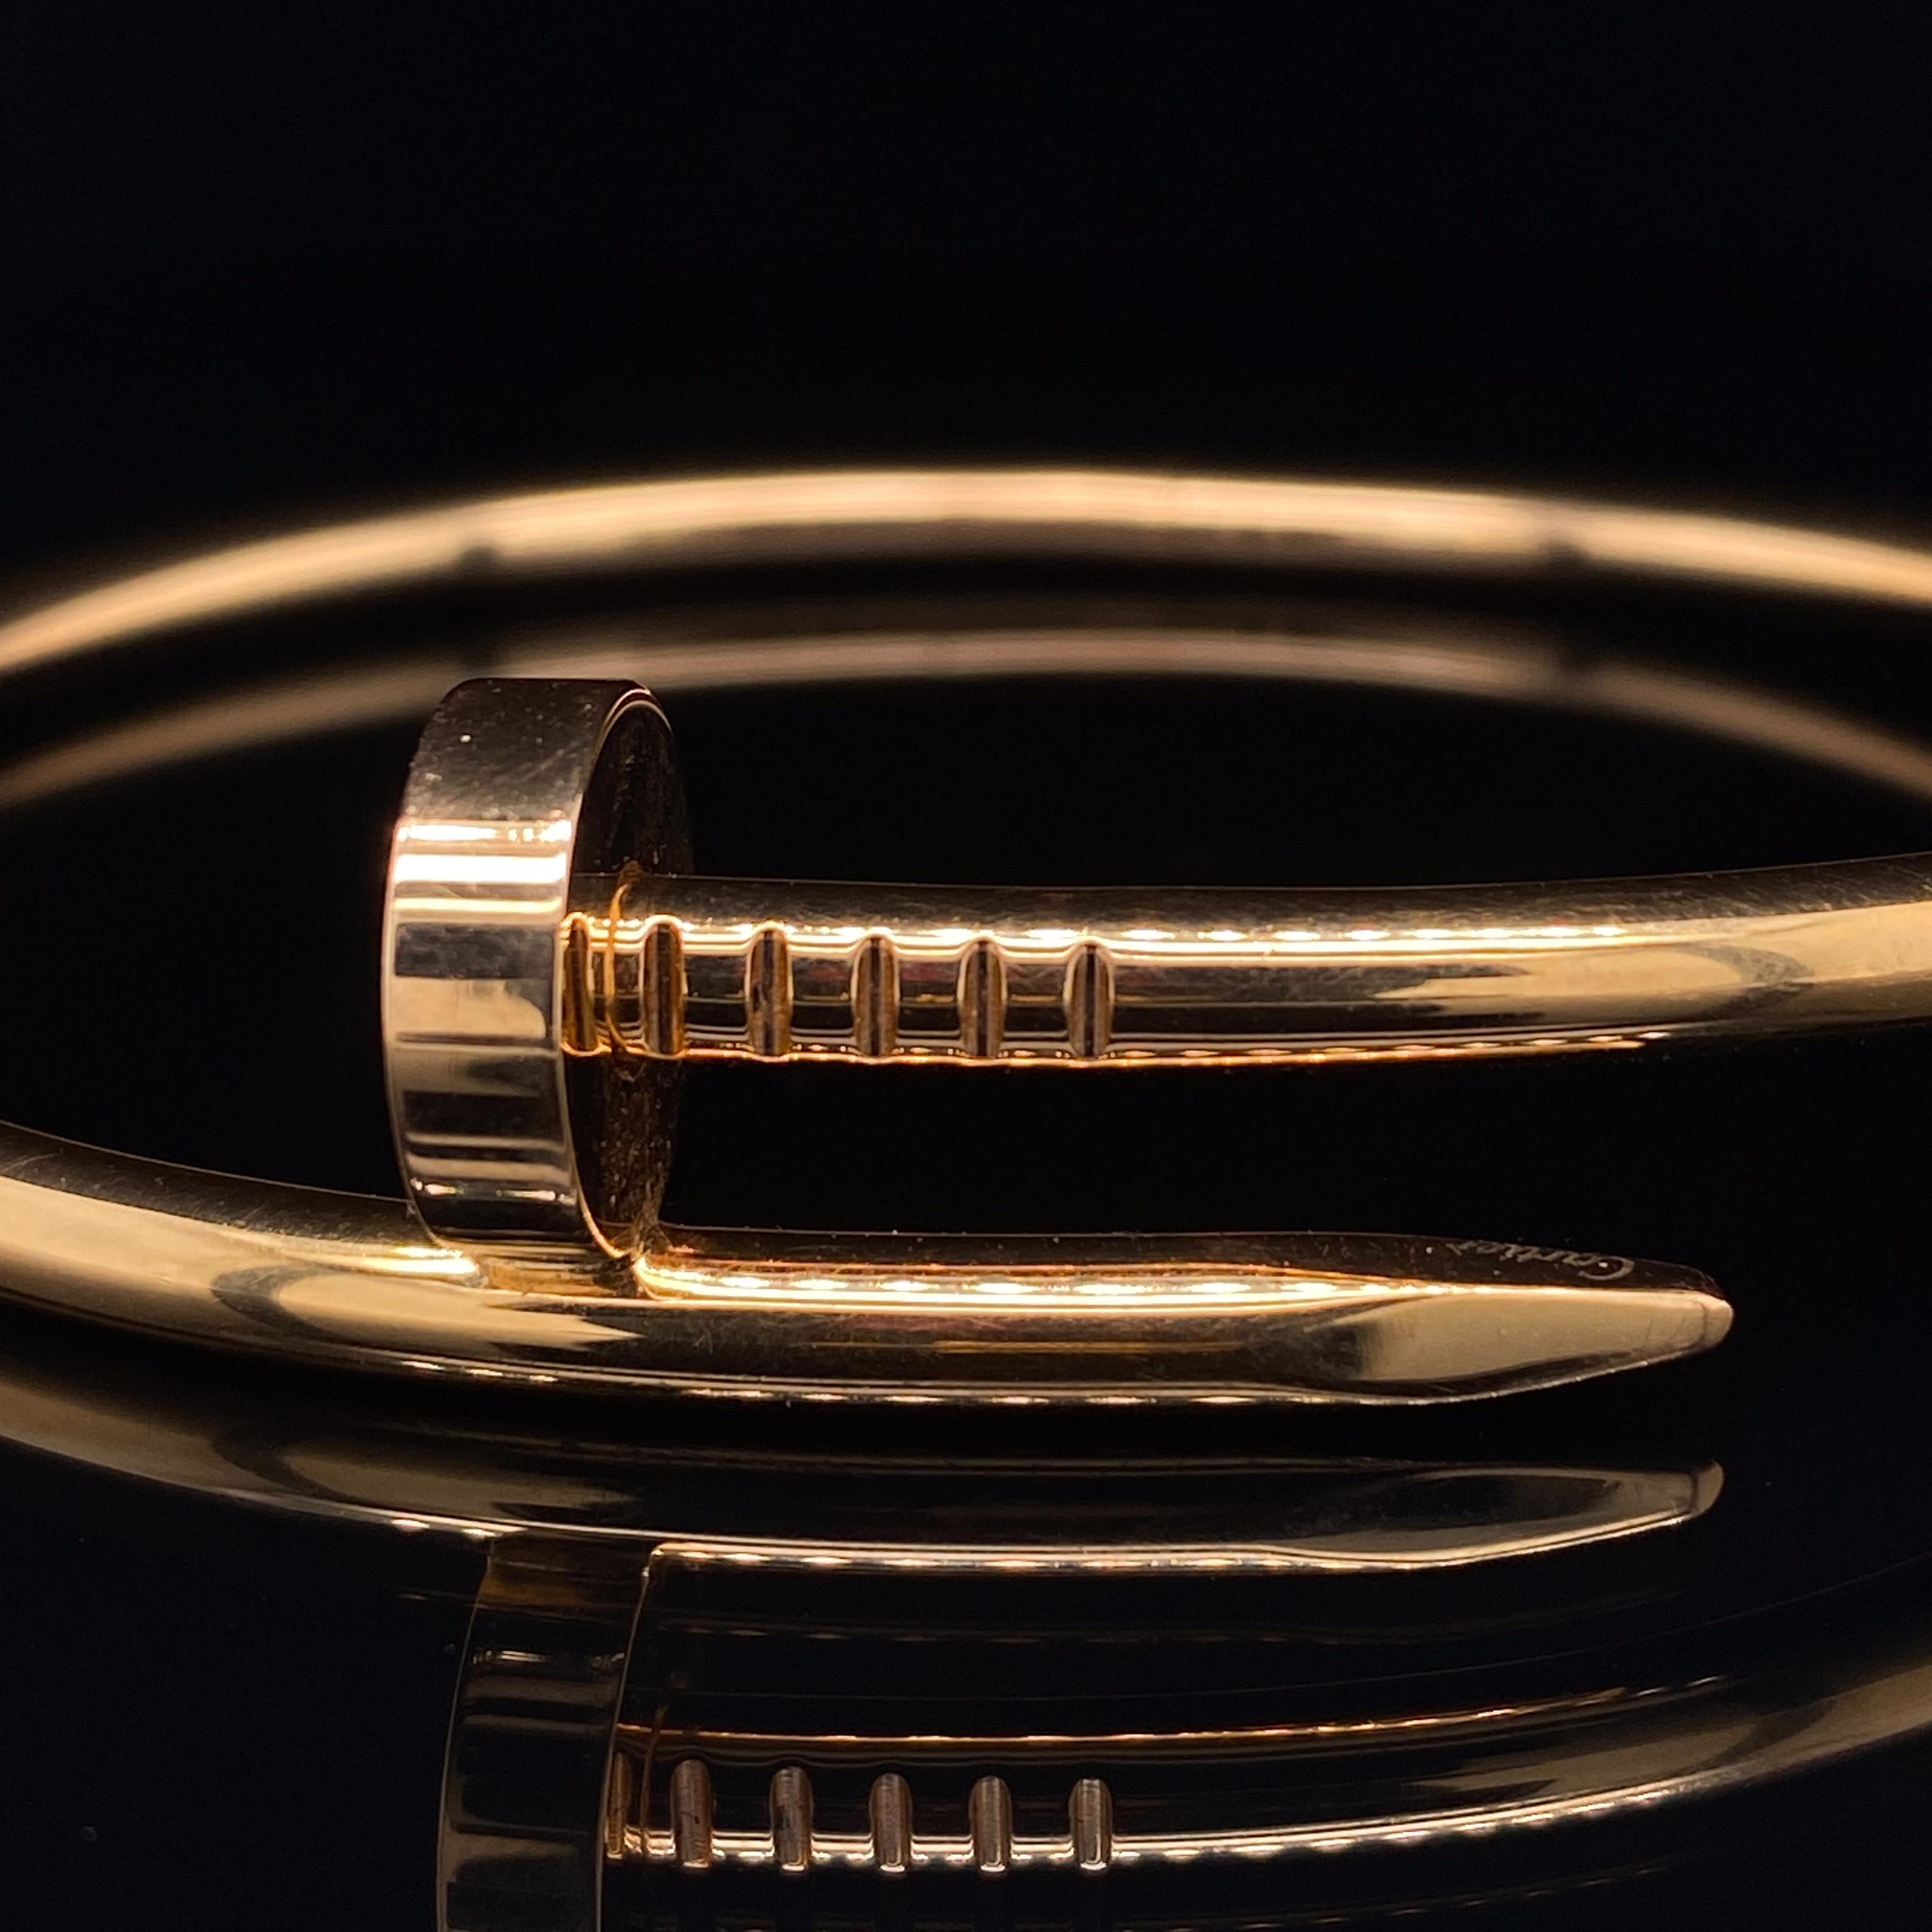 Cartier Juste un Clou bracelet in 18 karat yellow gold

'Juste un Clou' literally translates to 'Just a nail' this iconic design was dreamed up by Cartier in 70's New York in a bold piece of jewellery that that offers a sublime take on the